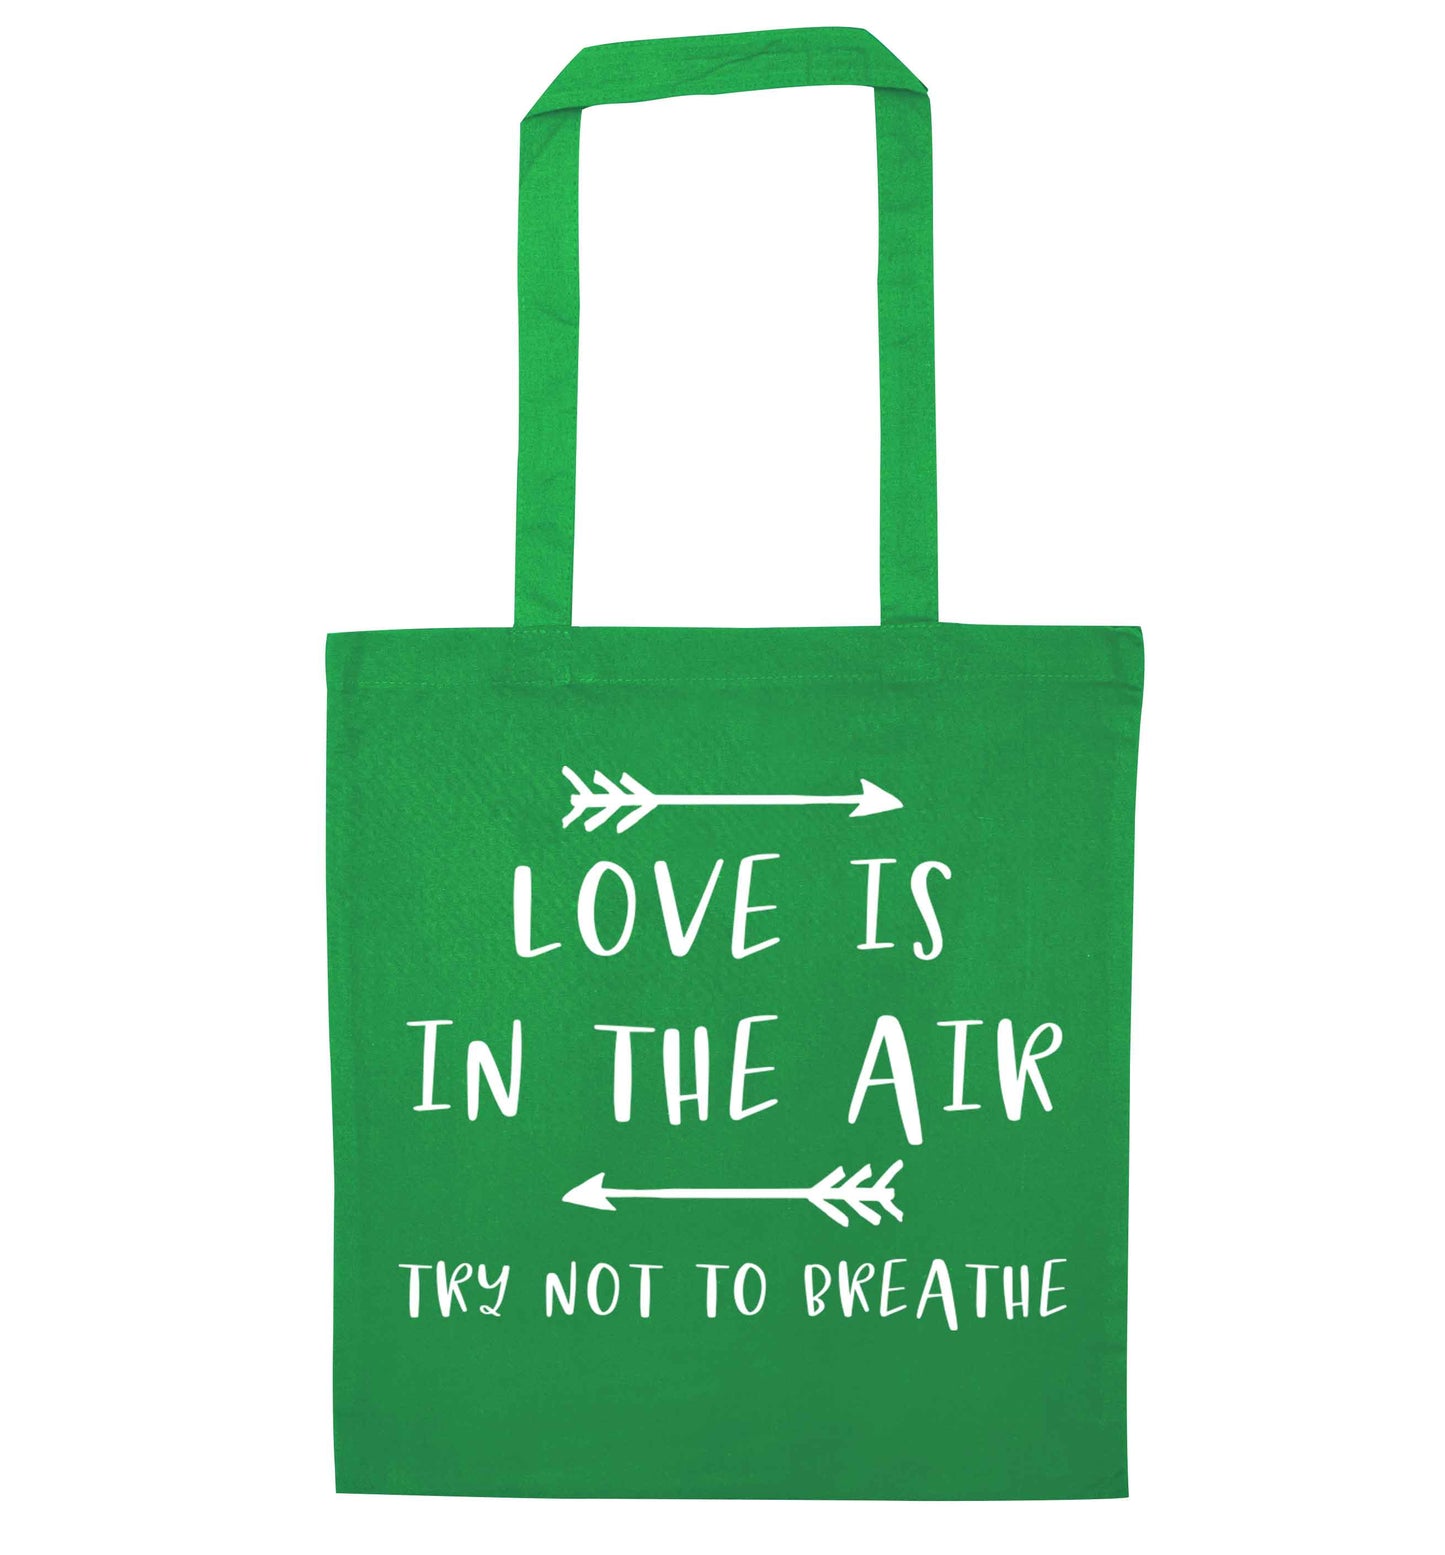 Love is in the air try not to breathe green tote bag